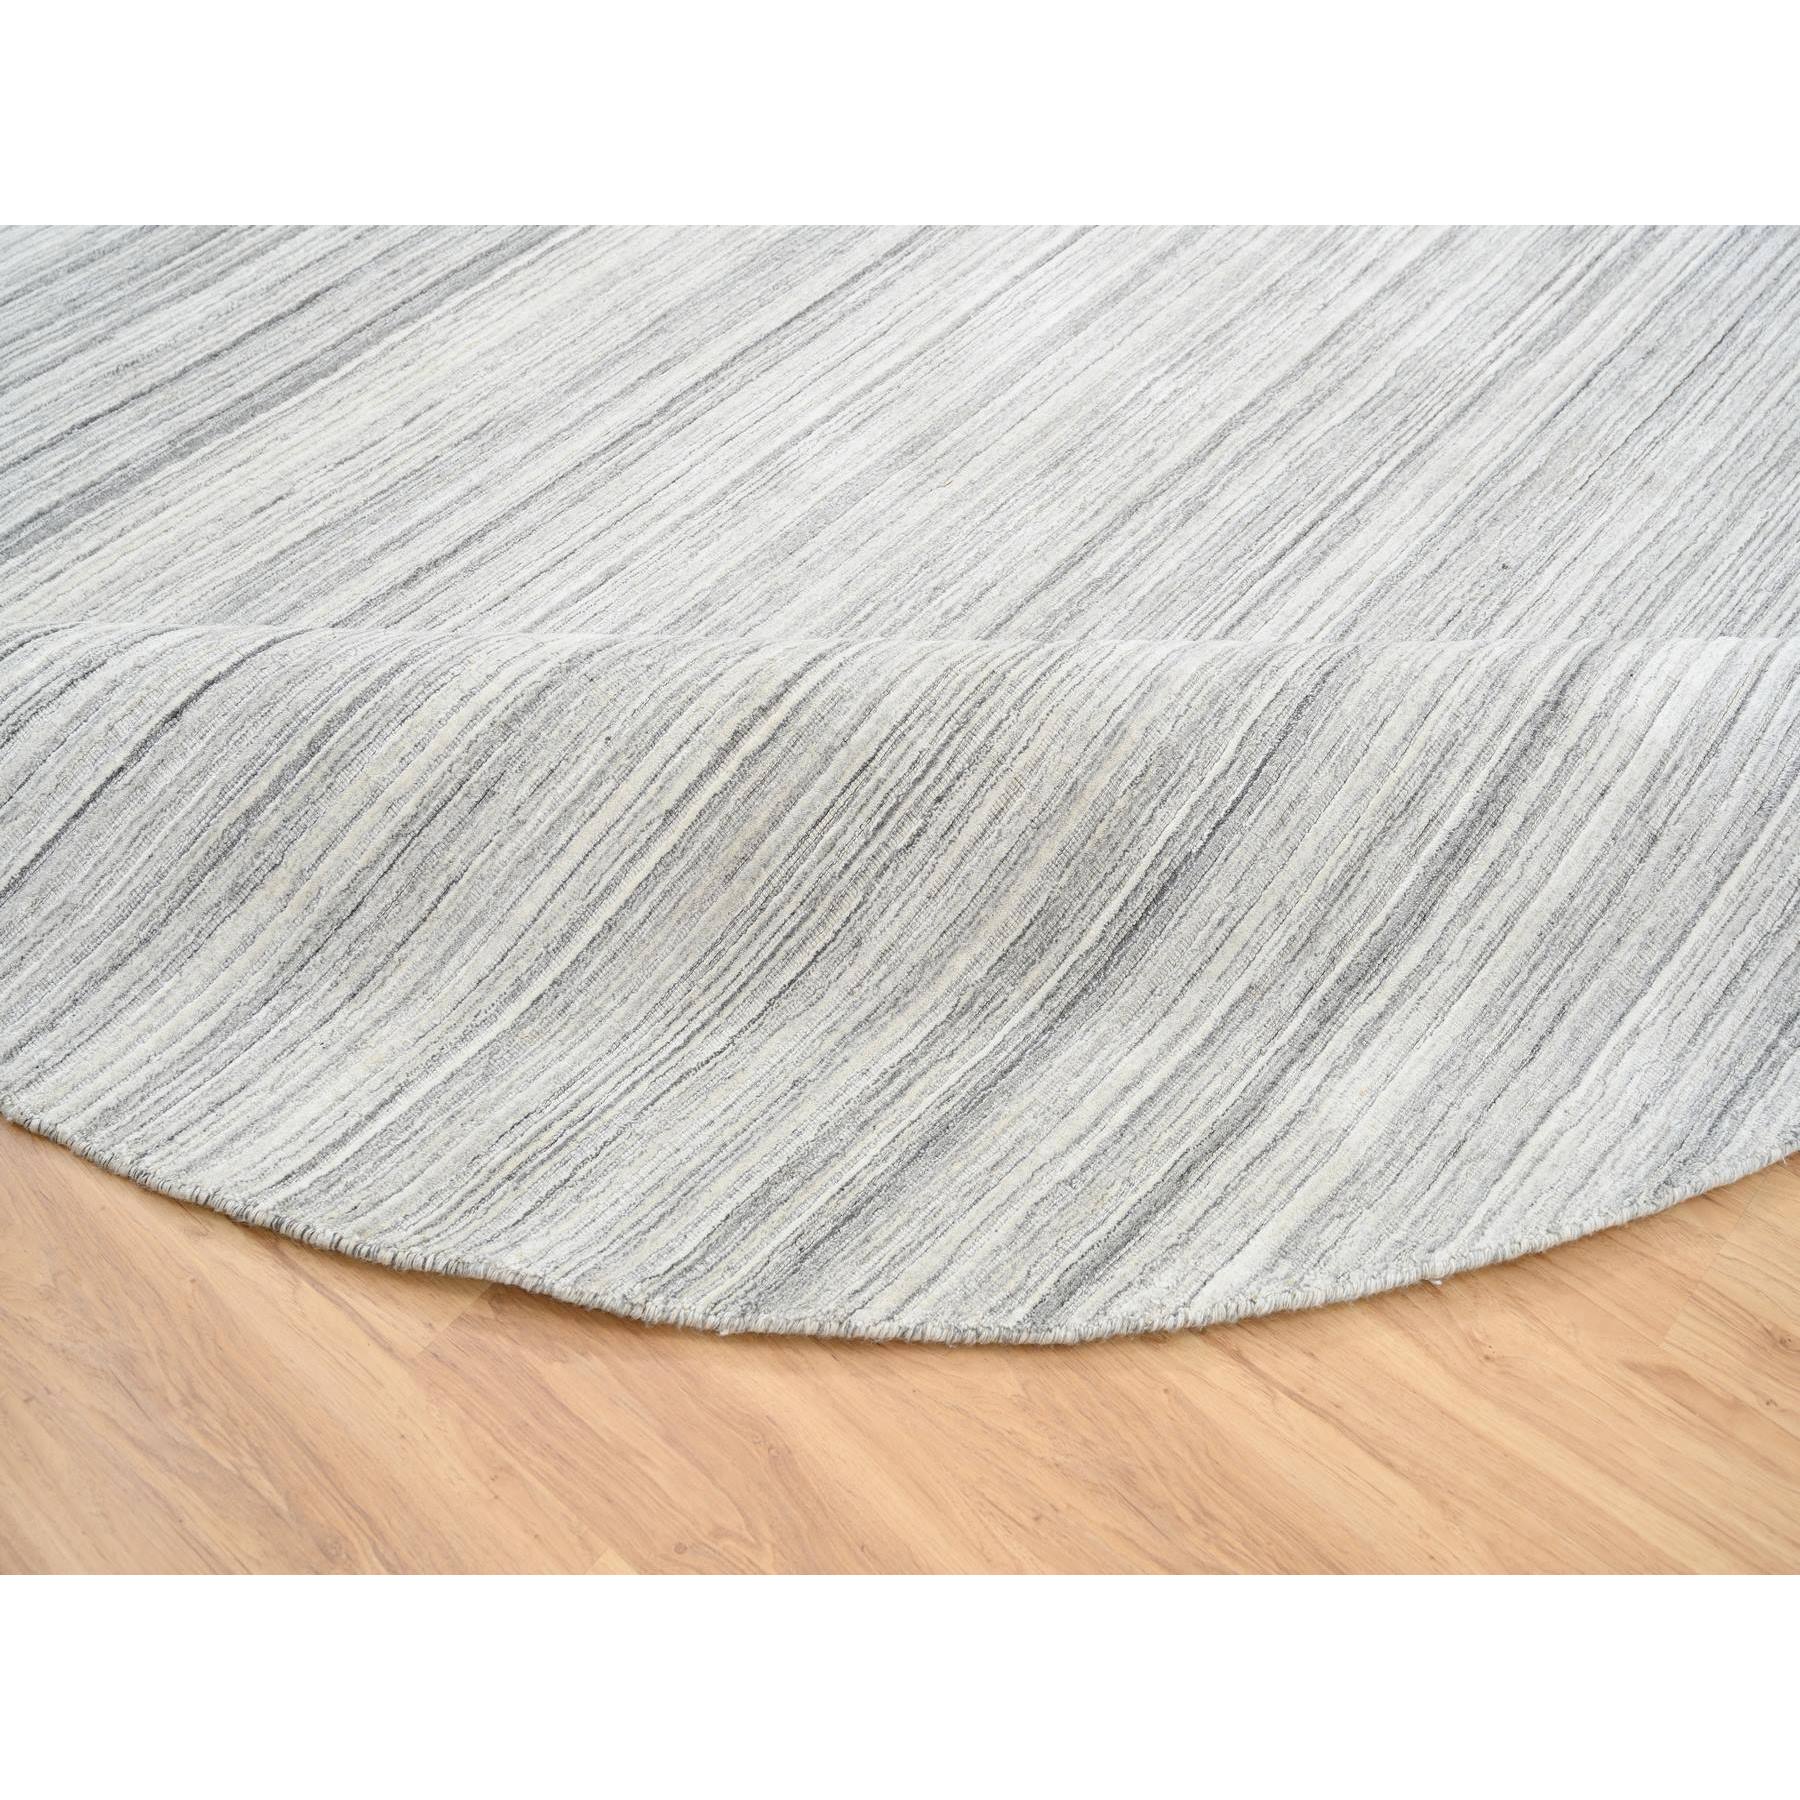 9'9"x9'9" Platinum Gray and Cream, Plain Hand Loomed Undyed Natural Wool, Modern Design Thick and Plush, Round Oriental Rug 